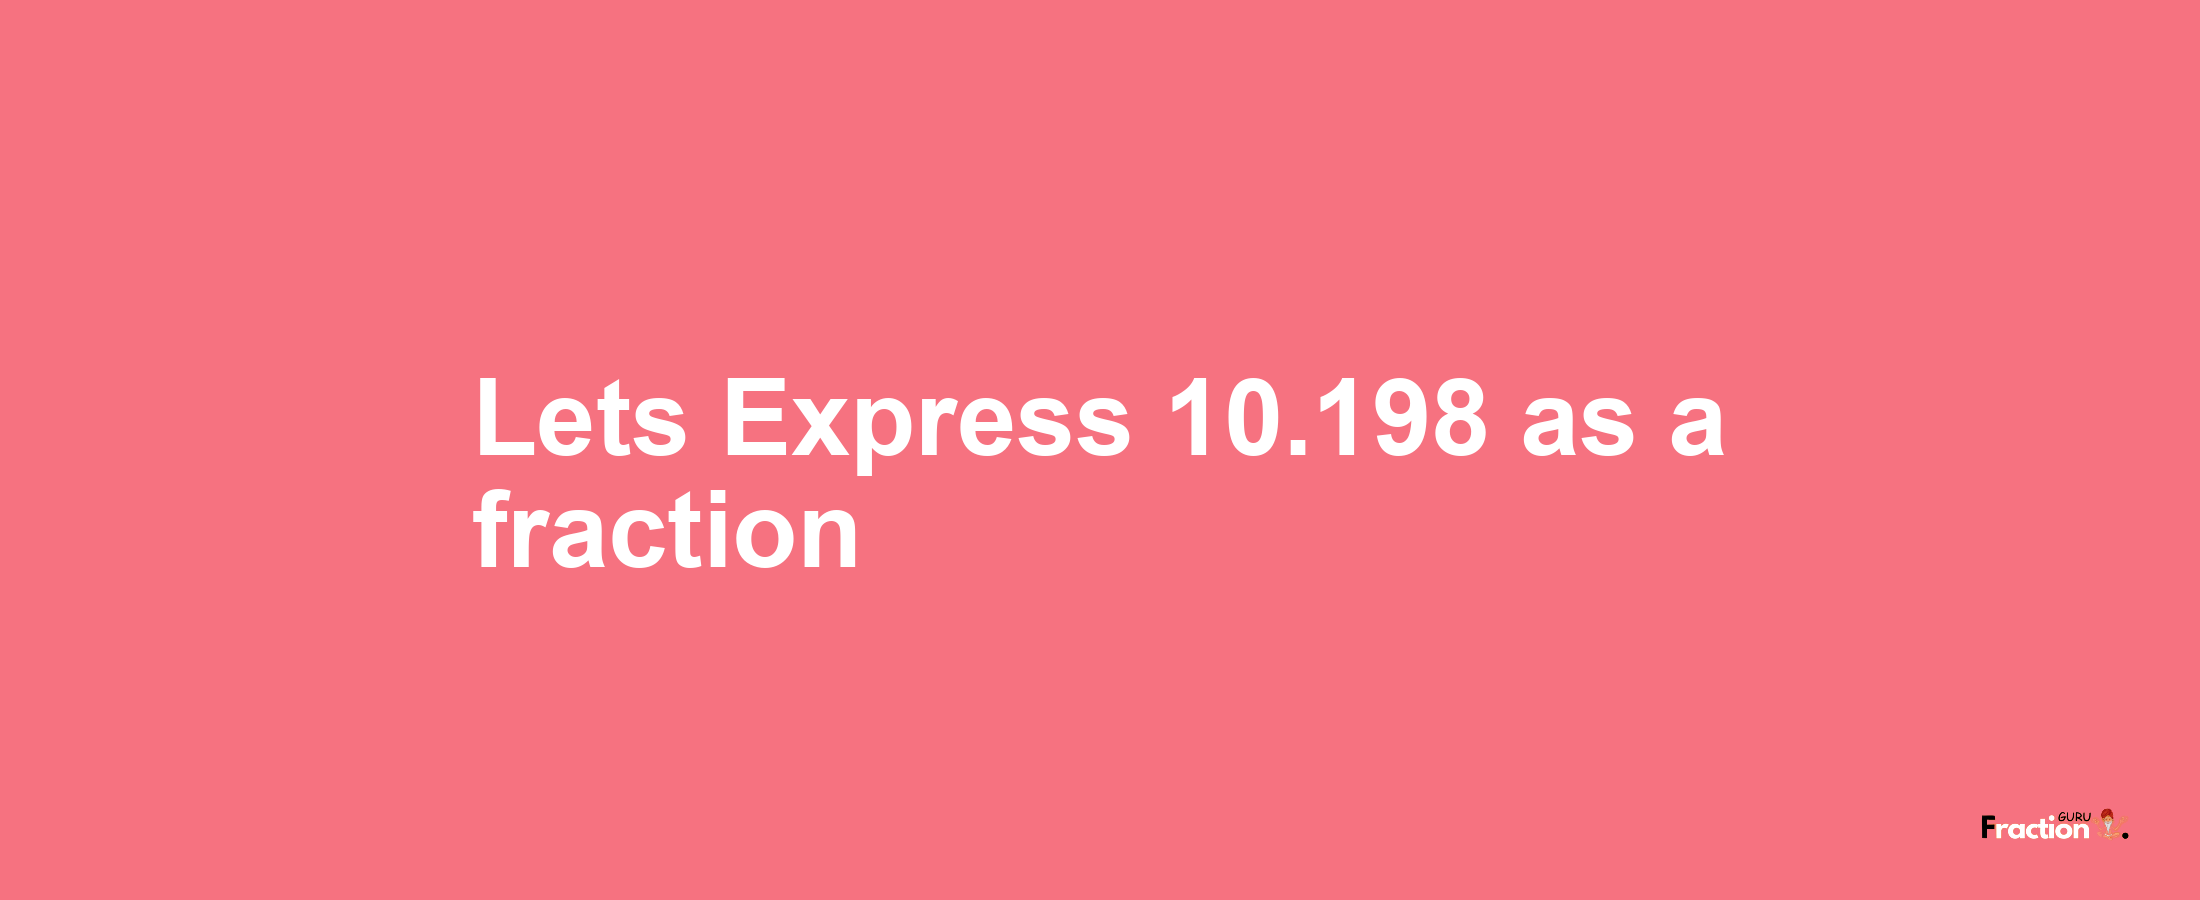 Lets Express 10.198 as afraction